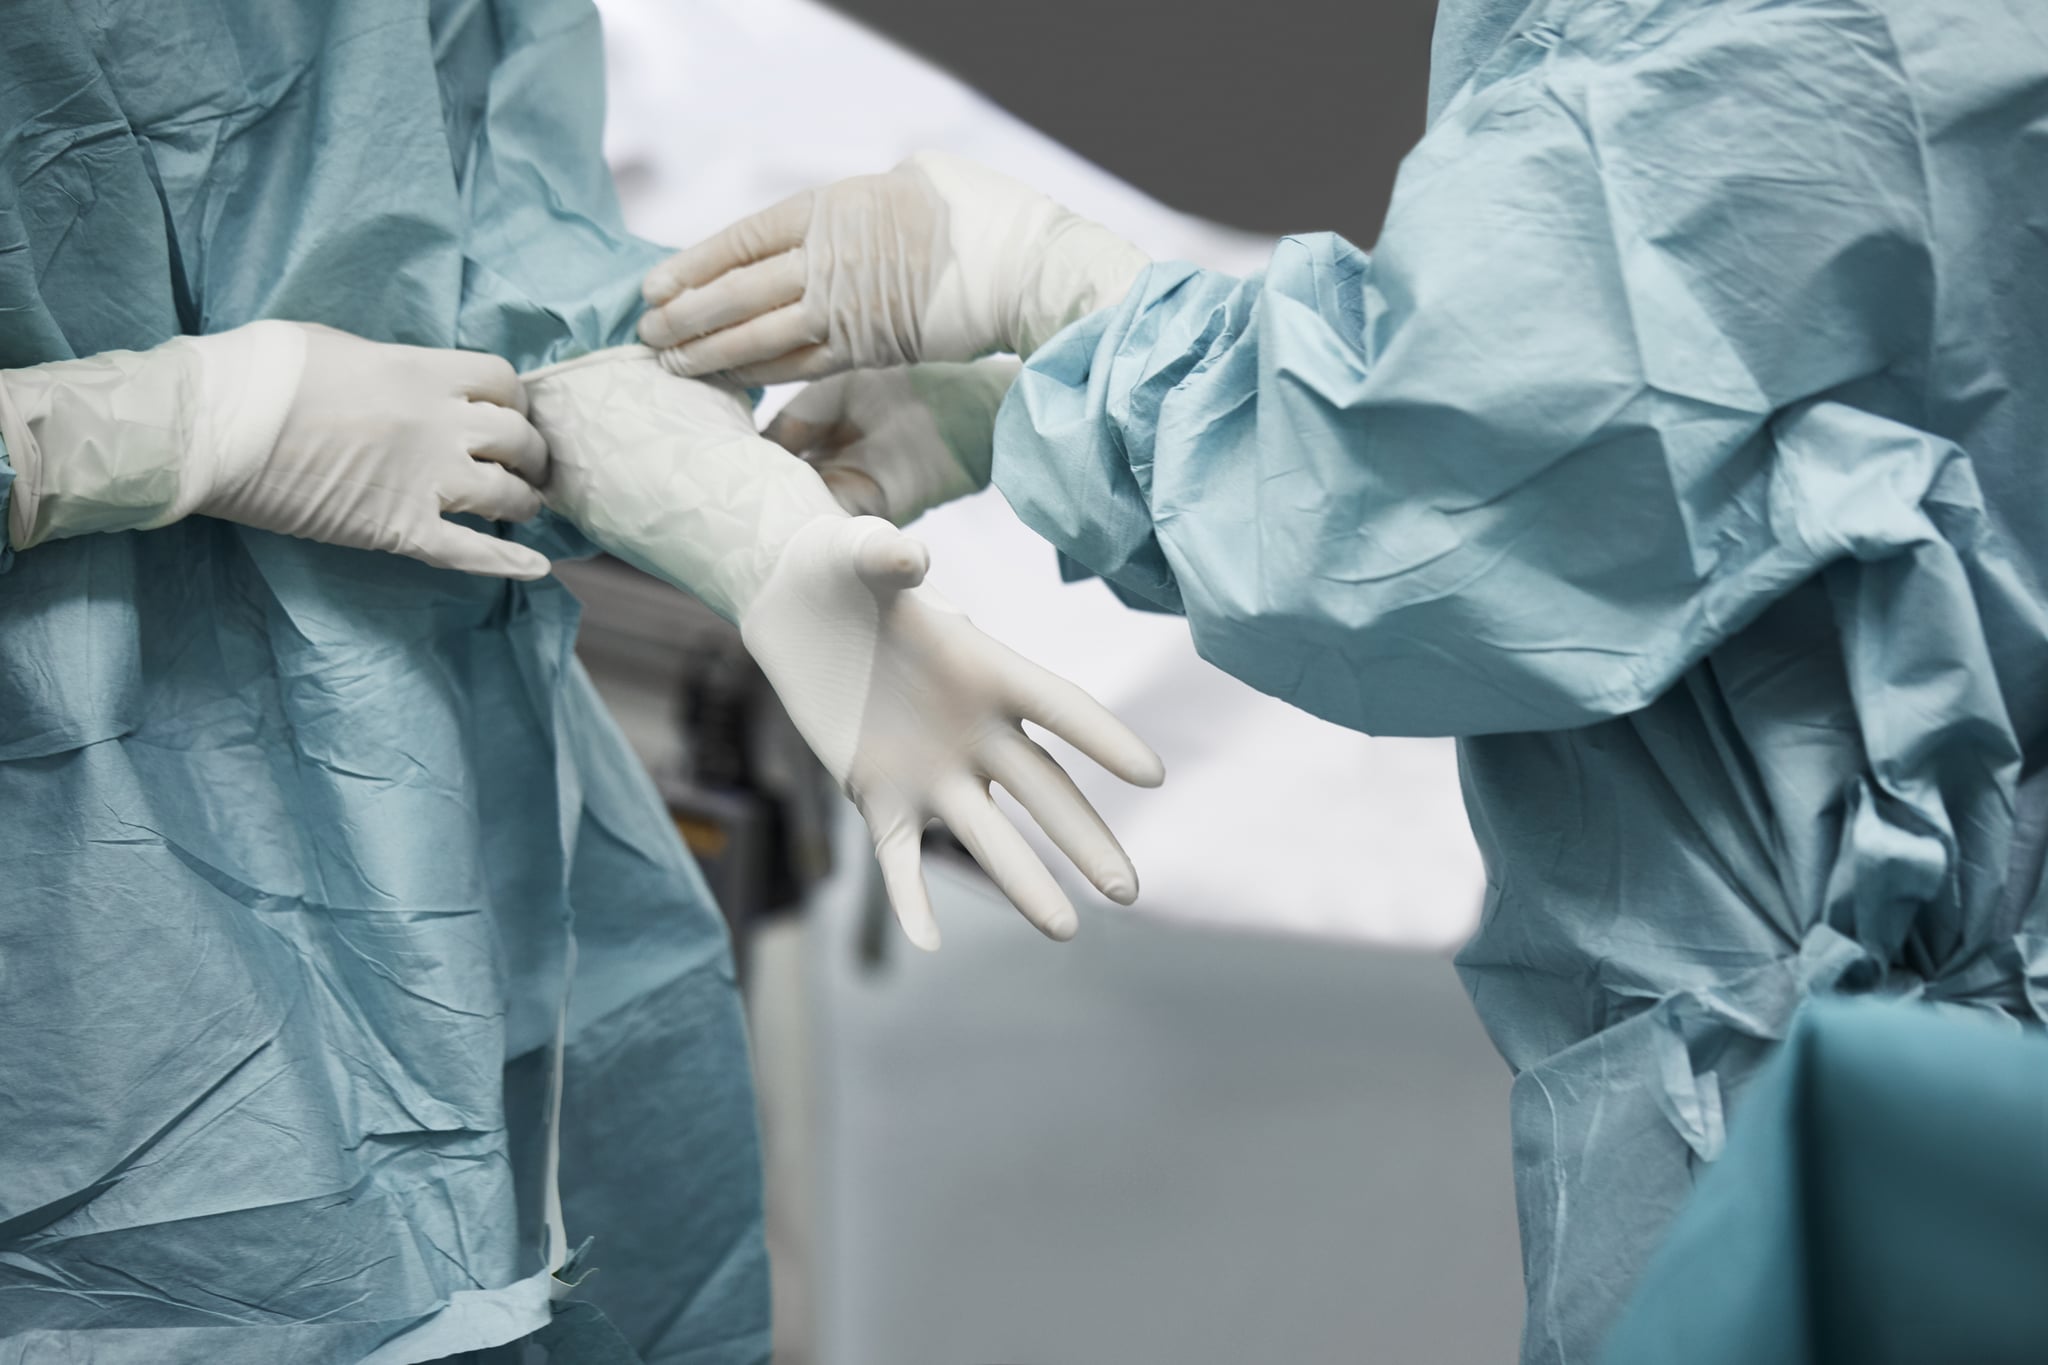 Midsection of female doctor helping surgeon wearing surgical glove. Medical colleagues are preparing for surgery. They are standing in emergency room.